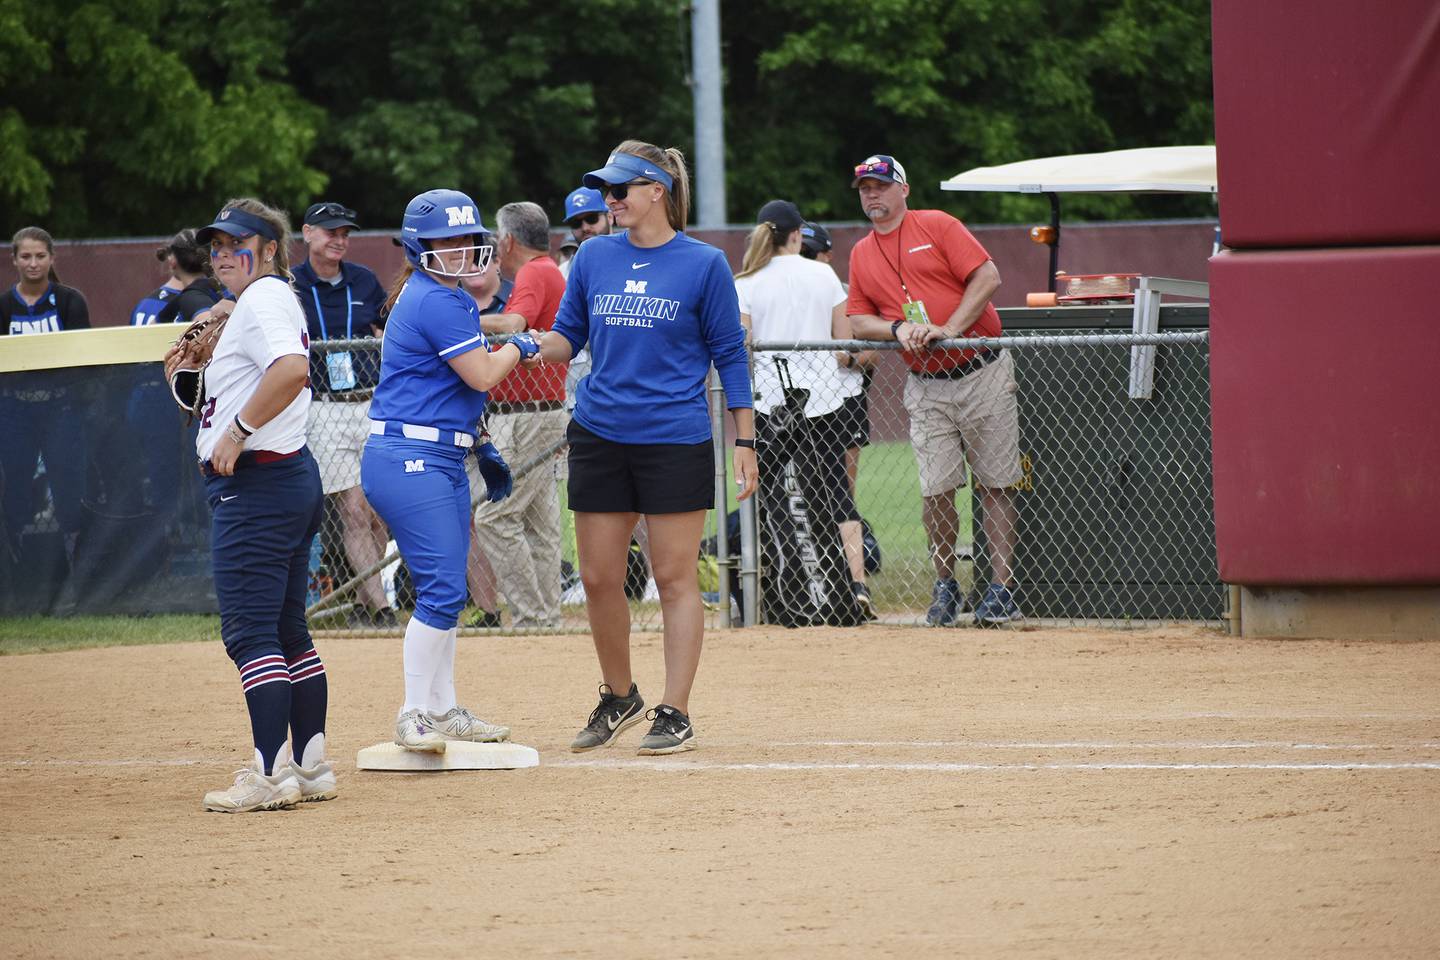 Millikin softball coach Katie Tenboer talks to a baserunner during a game at the NCAA Division III World Series. Tenboer, a Morrison native, led the Big Blue to the D-III championships for the first time in program history.